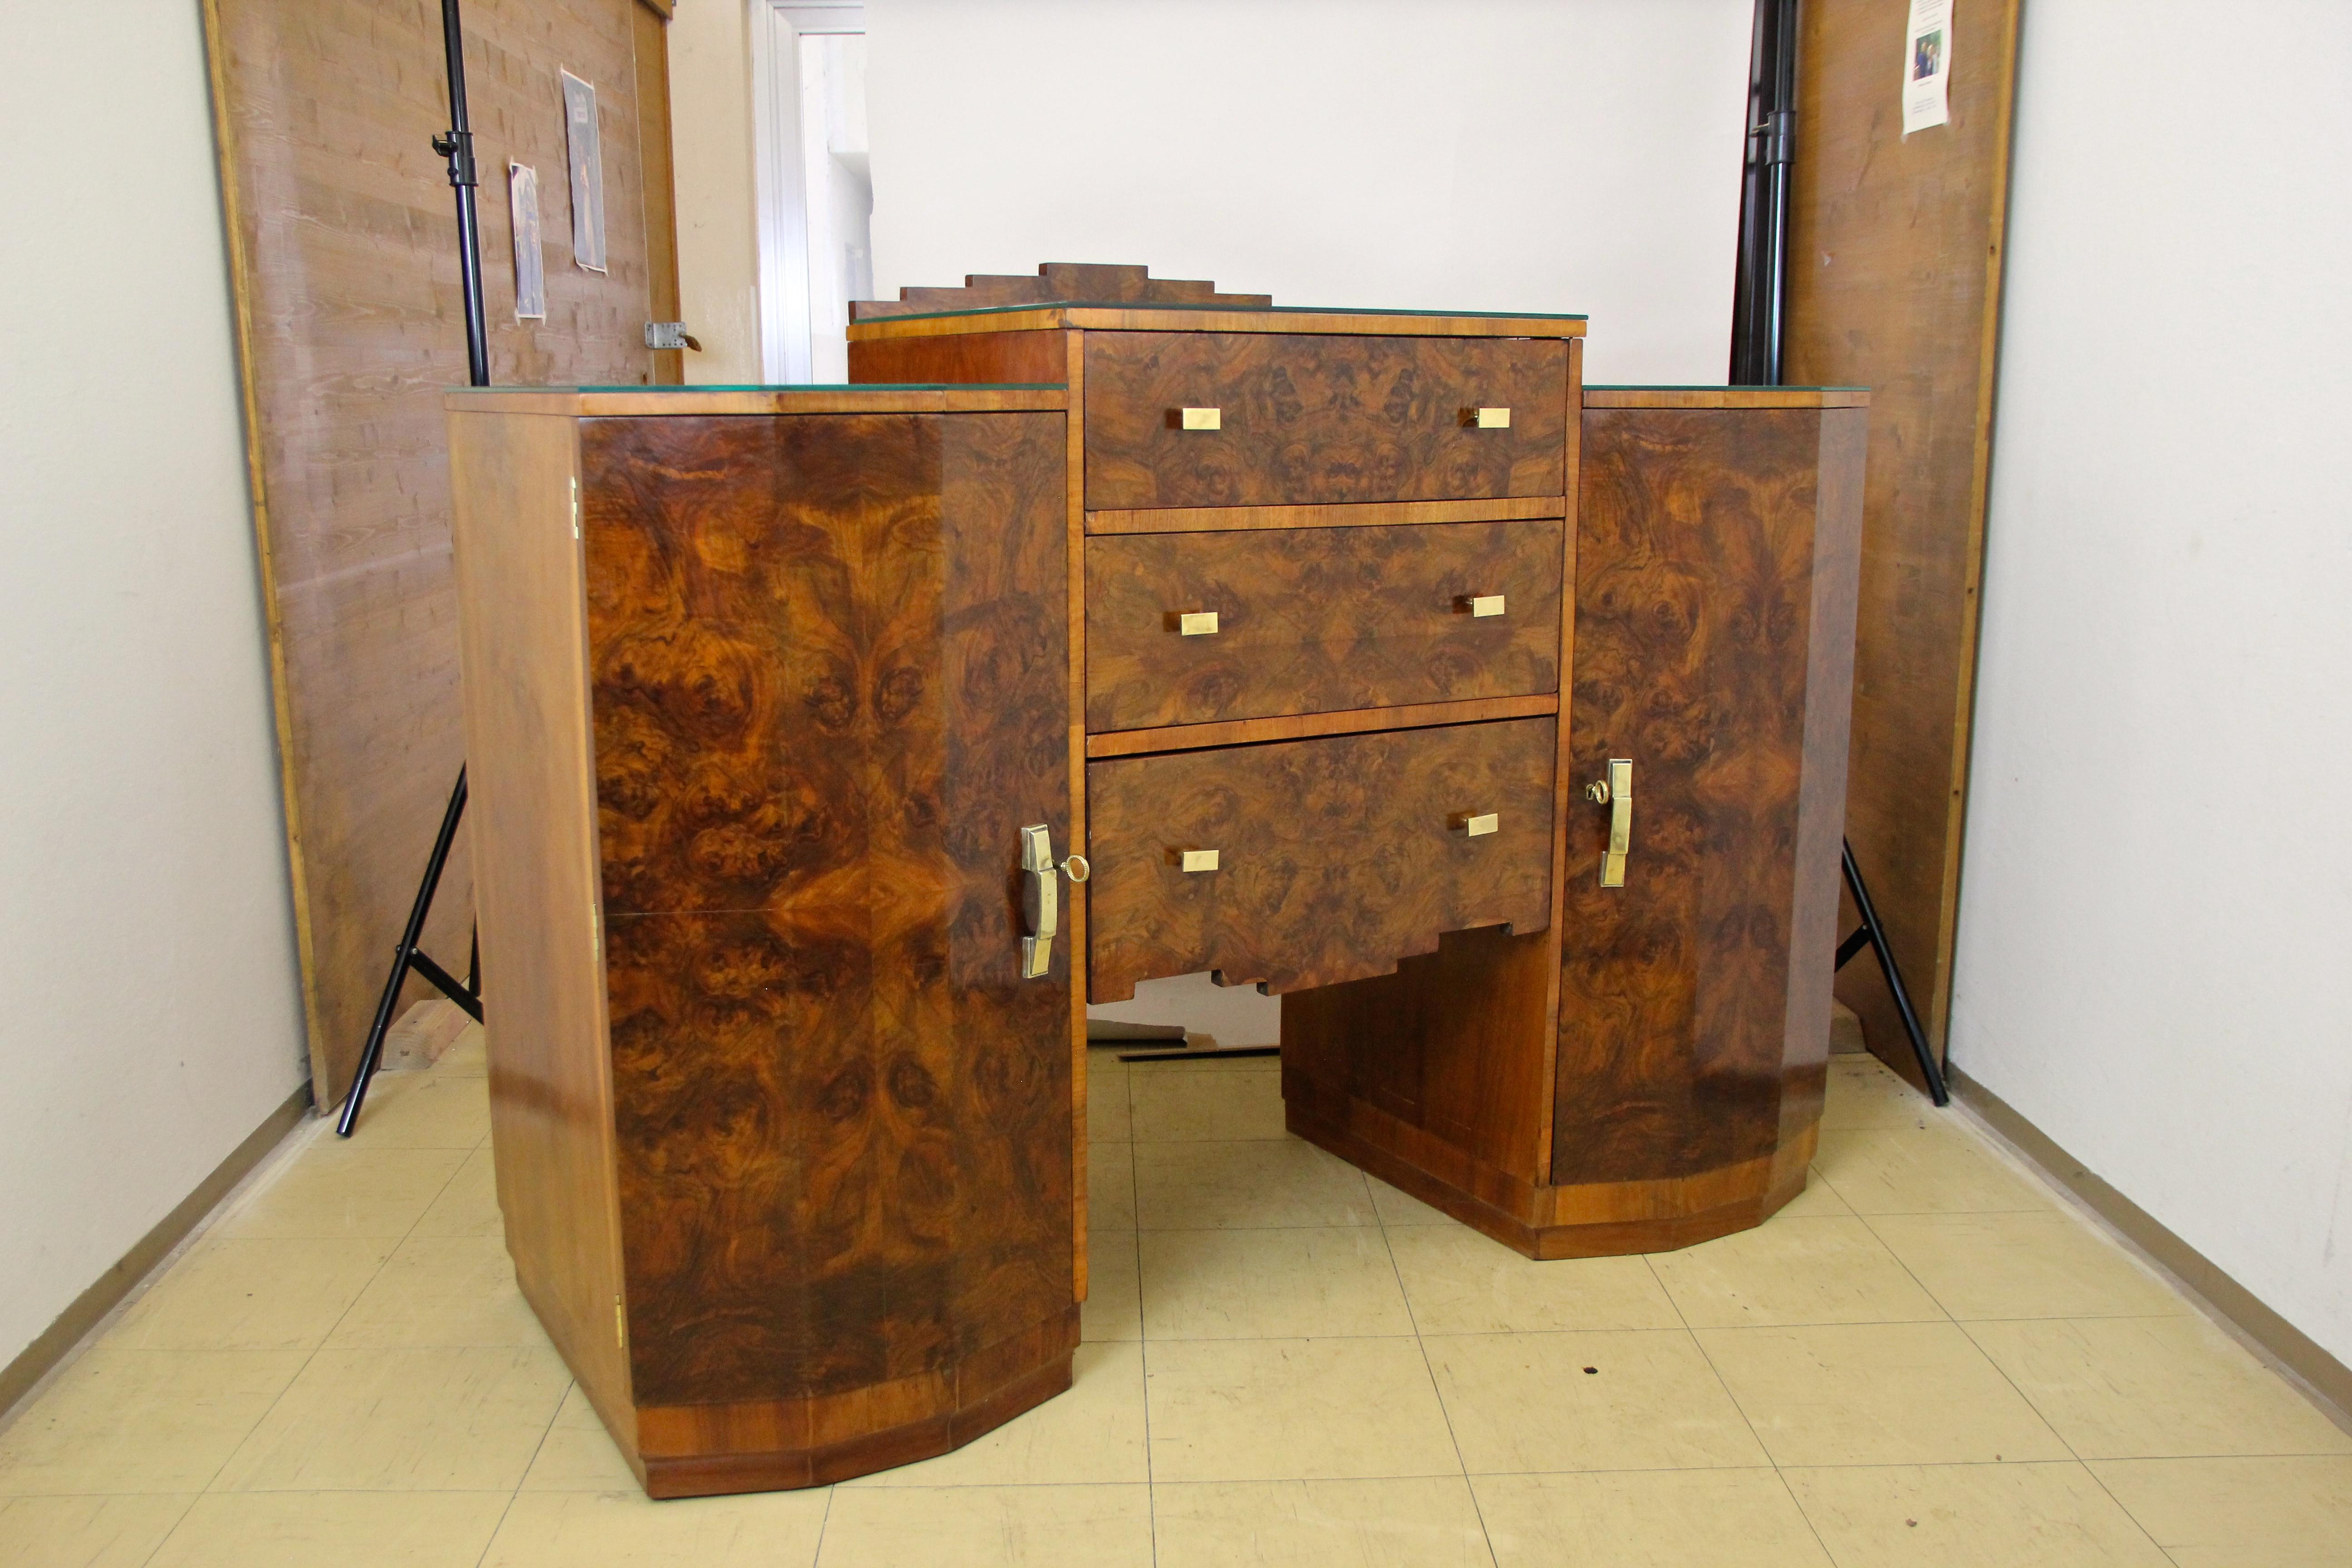 Unique designed Art Deco sideboard or buffet out of Austria from the period circa 1925. This unusual shaped side board impresses with an absolute great book matched burr walnut veneer, giving it a real mesmerizing grain. The exceptional design with